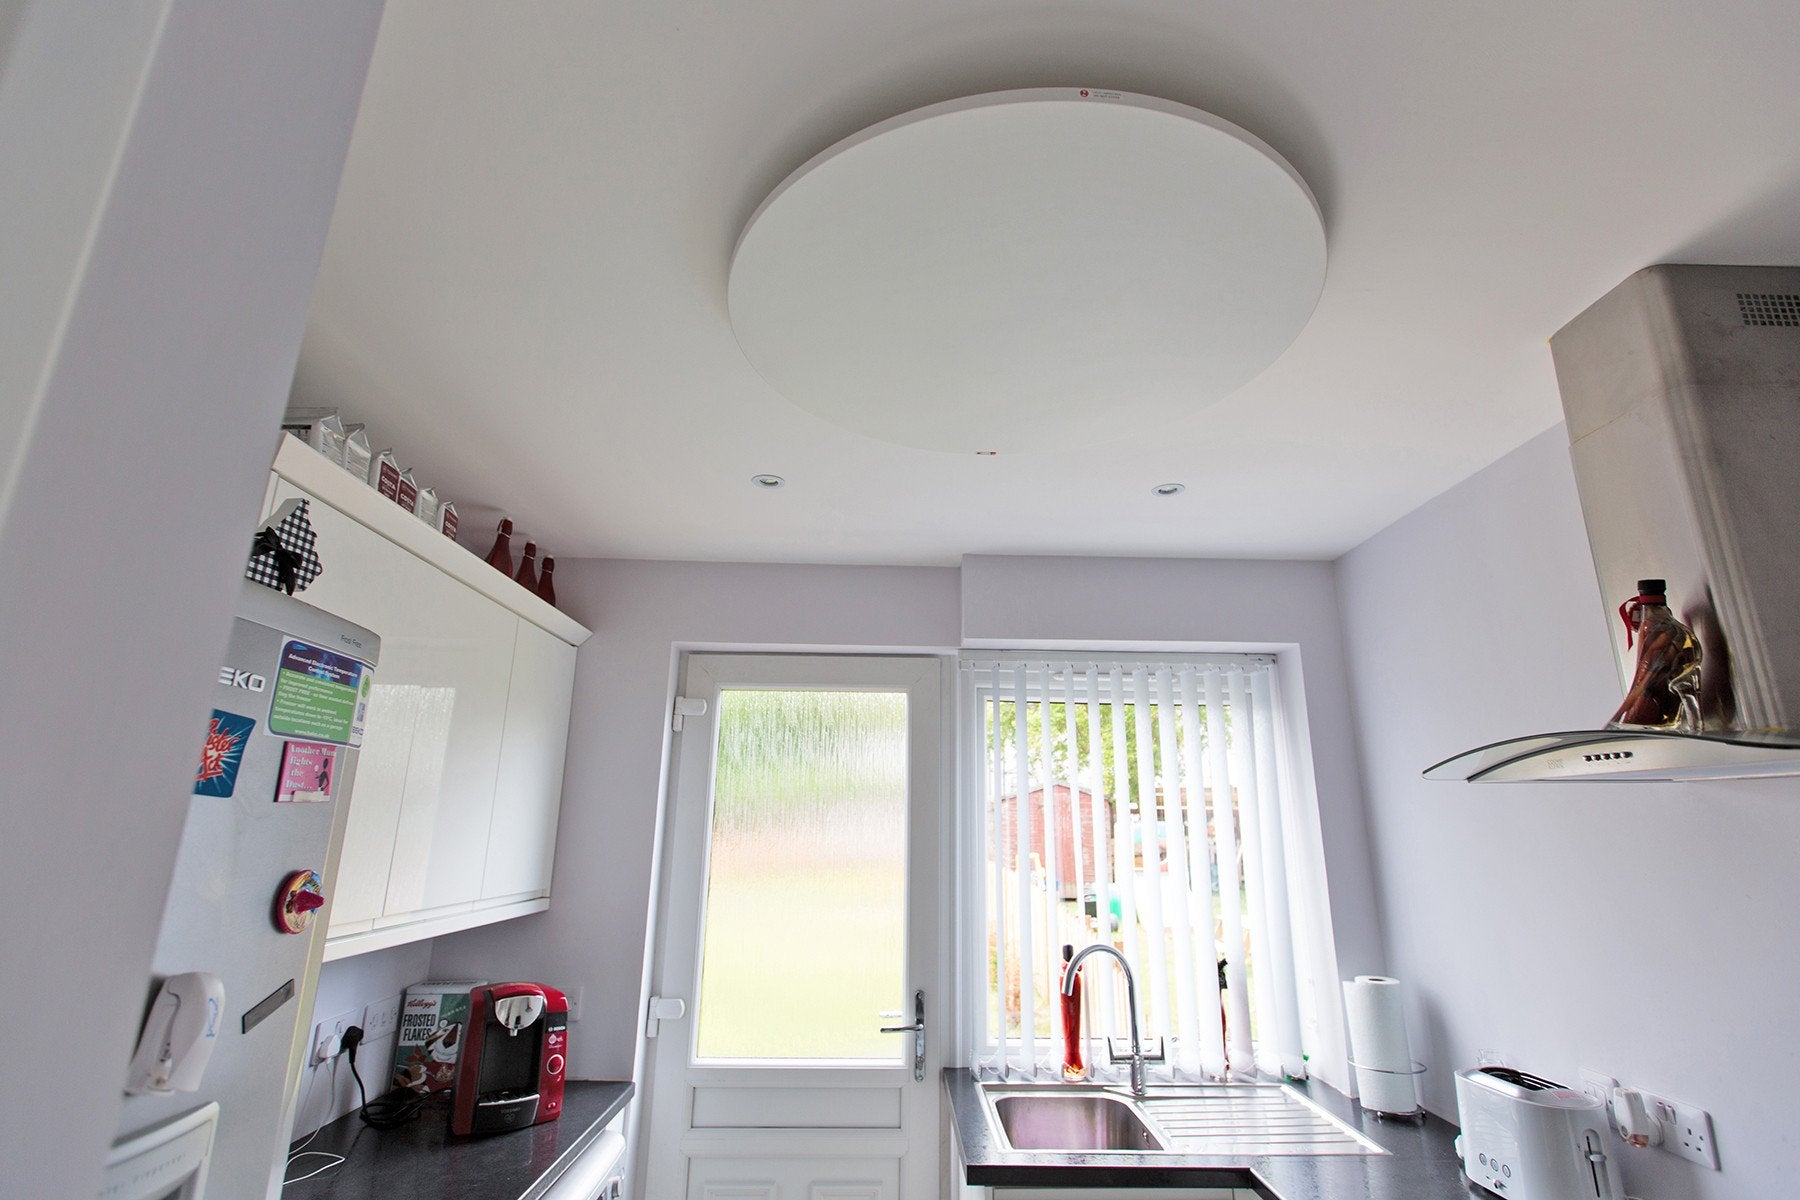 Redwell Infrared Heater Ceiling Round in a Small Space